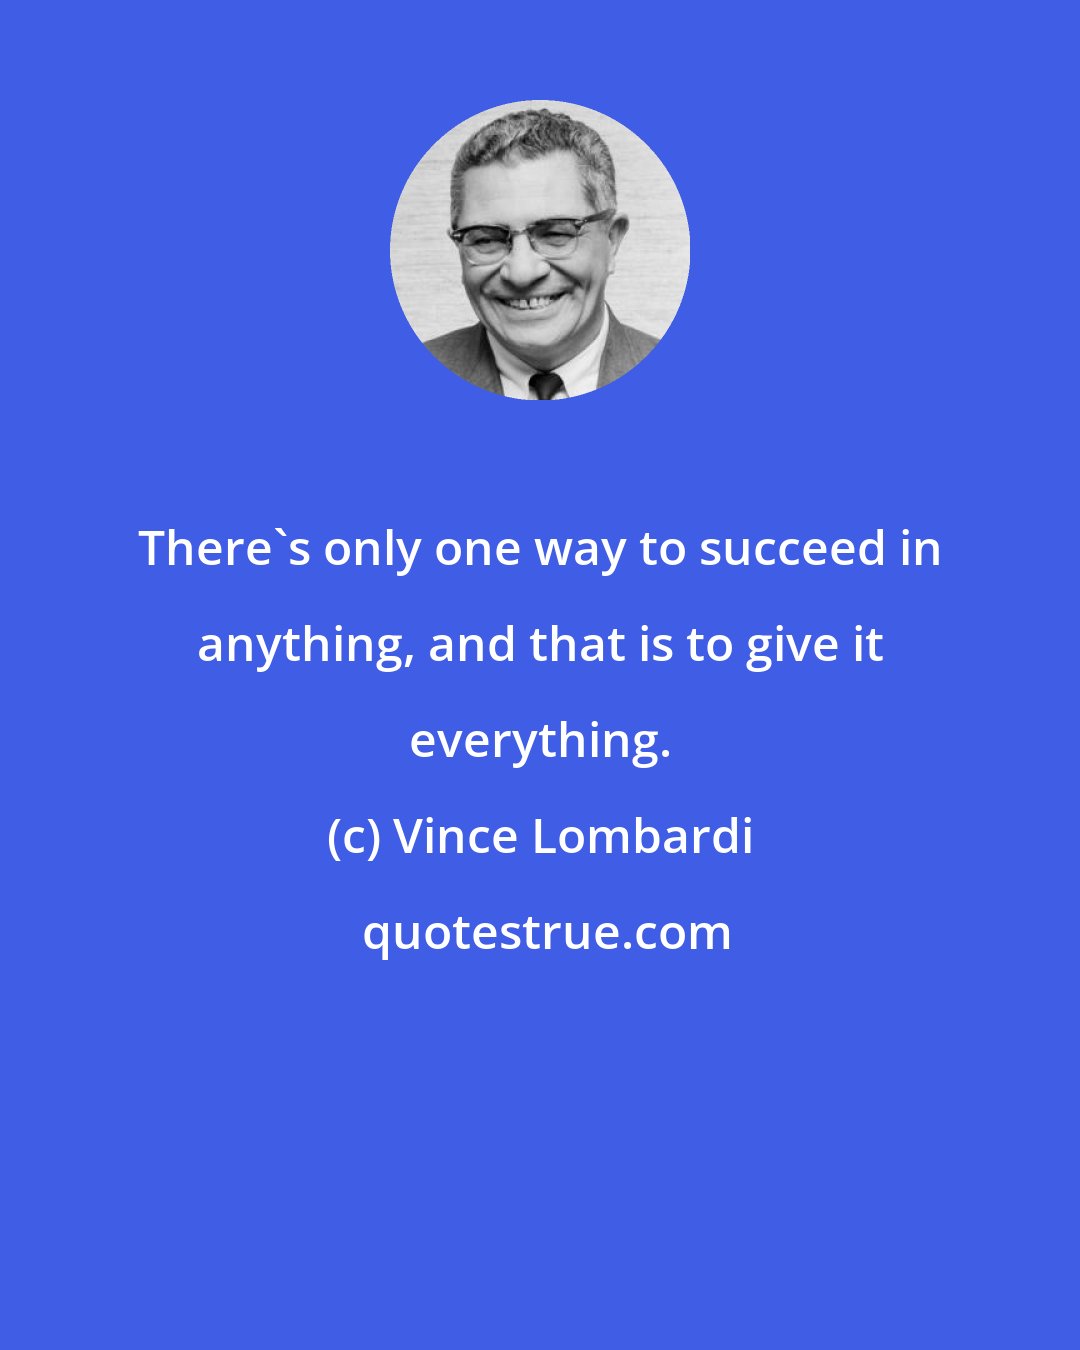 Vince Lombardi: There's only one way to succeed in anything, and that is to give it everything.